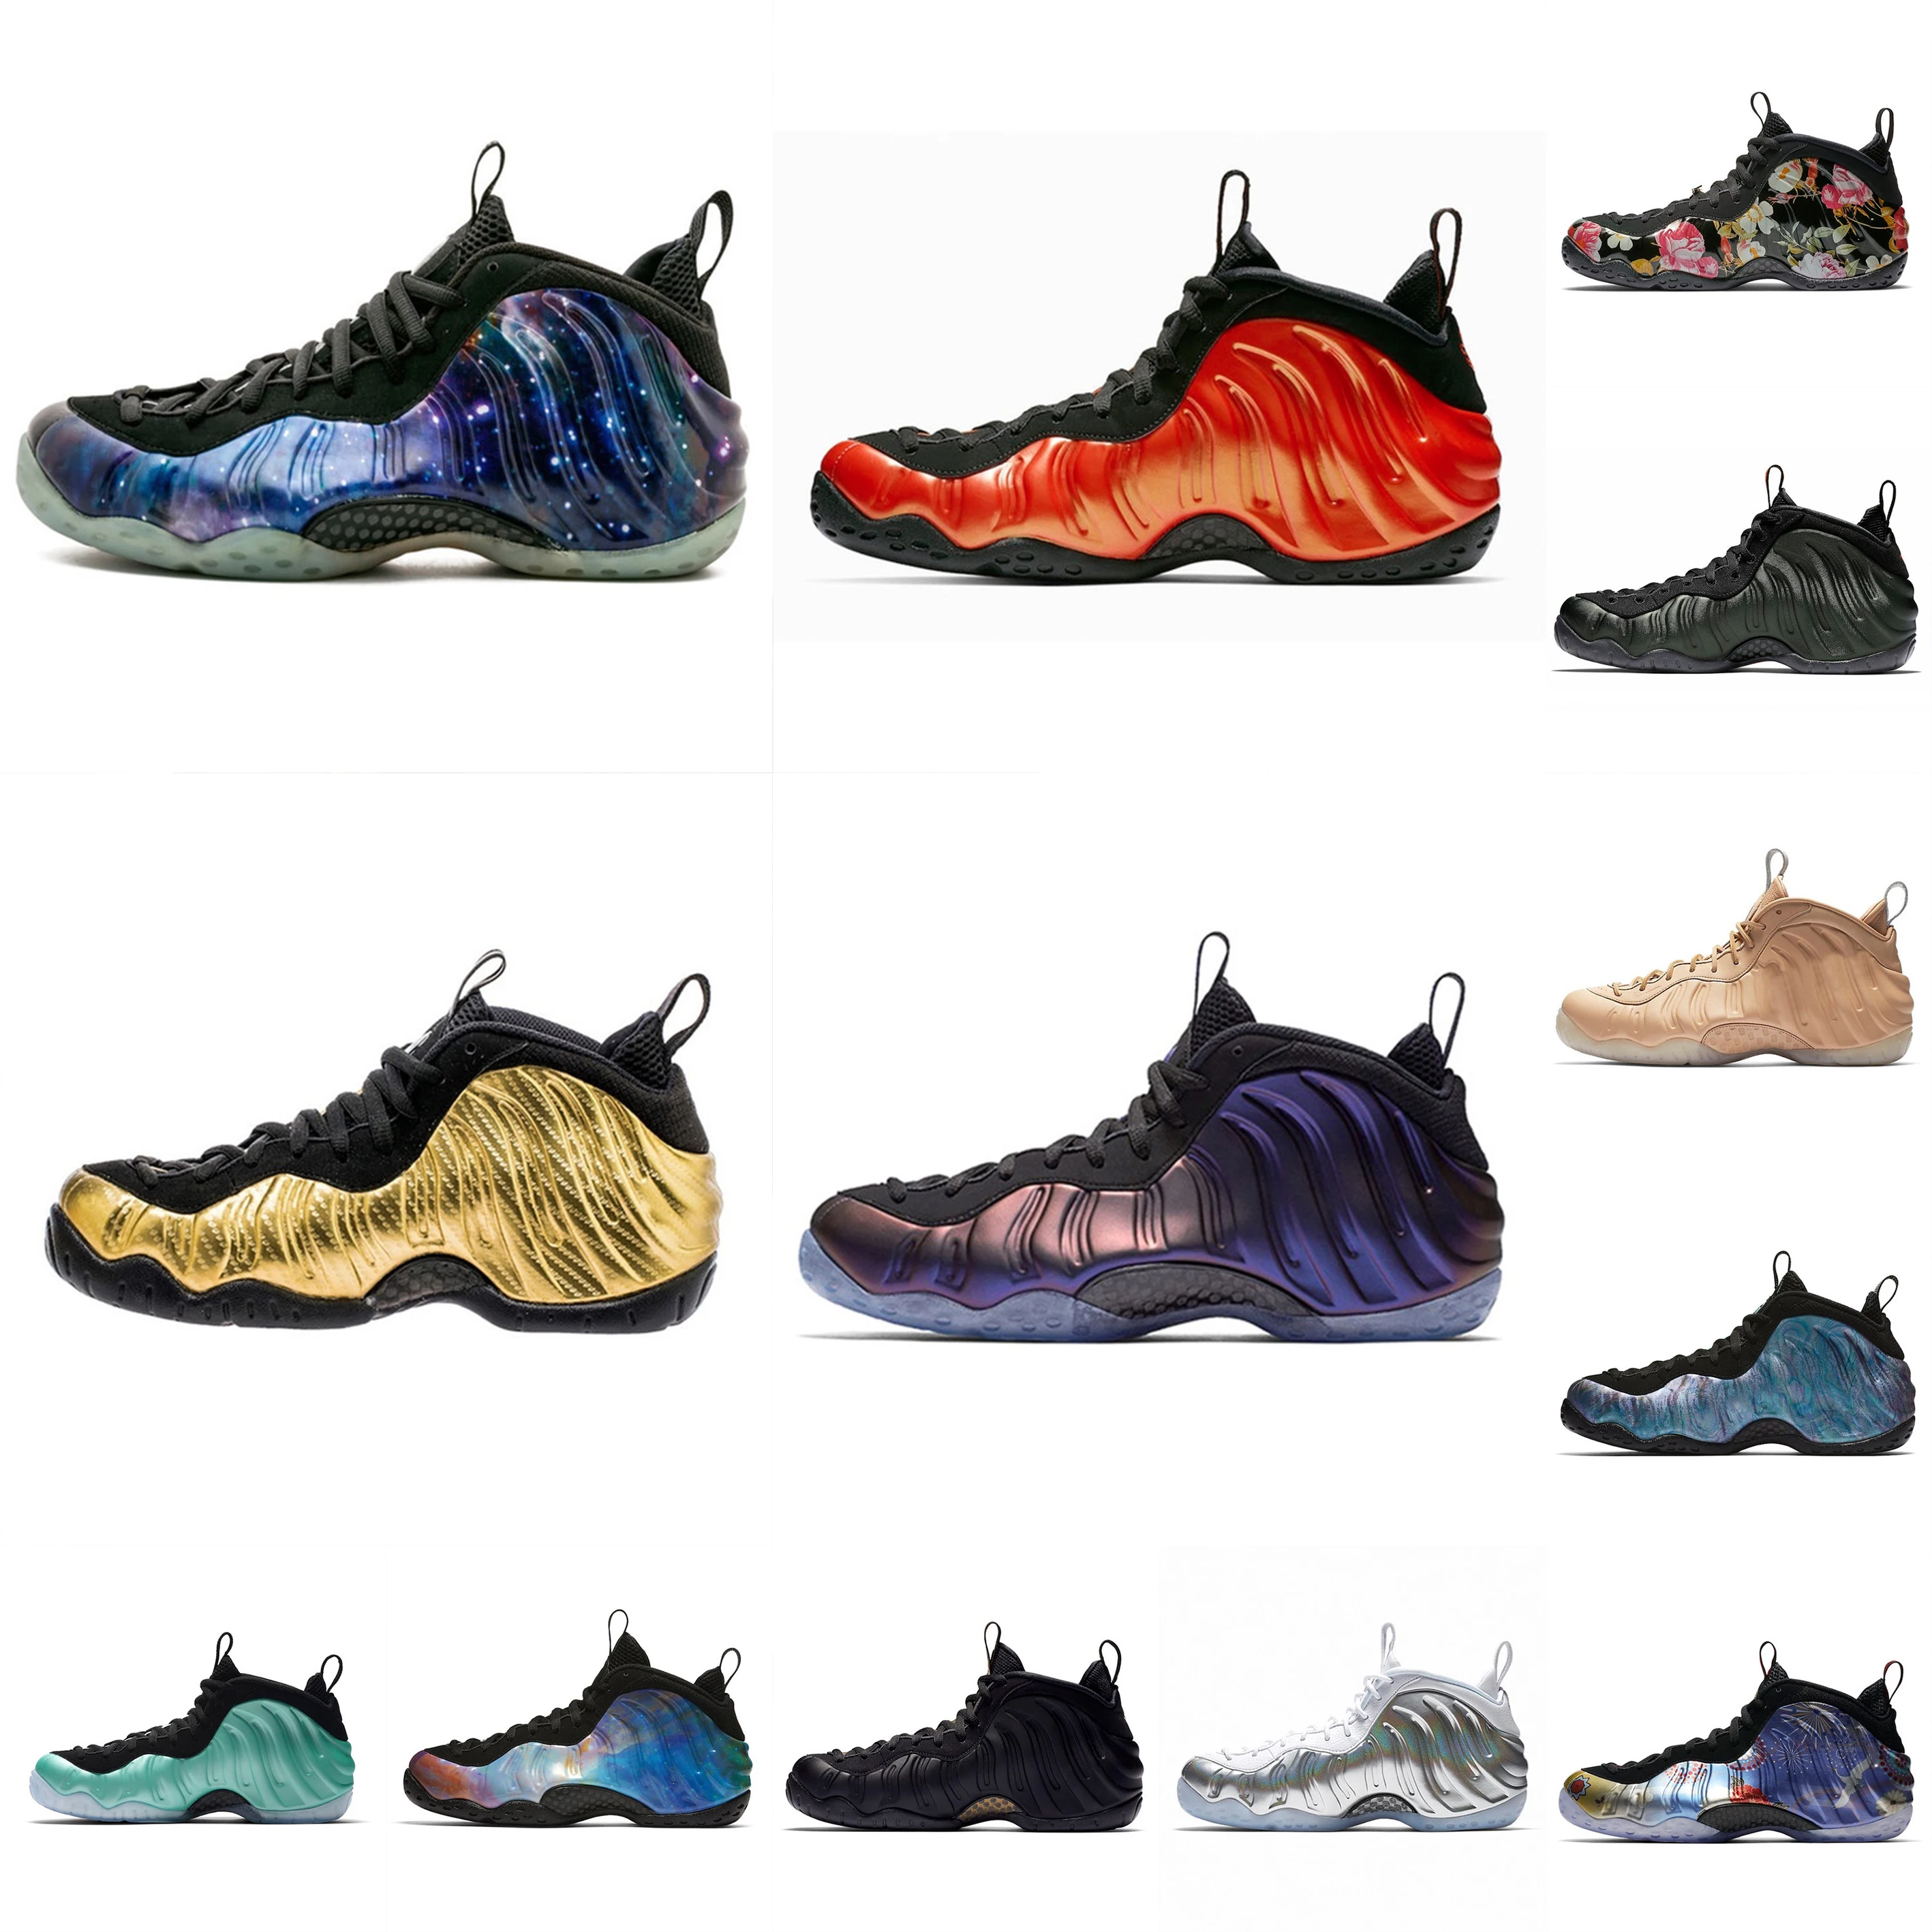 

Hot Sale Penny Hardaway Mens Basketball Shoes Foam One Shattered Air Foamposite Men Sneakers Sports Trainers